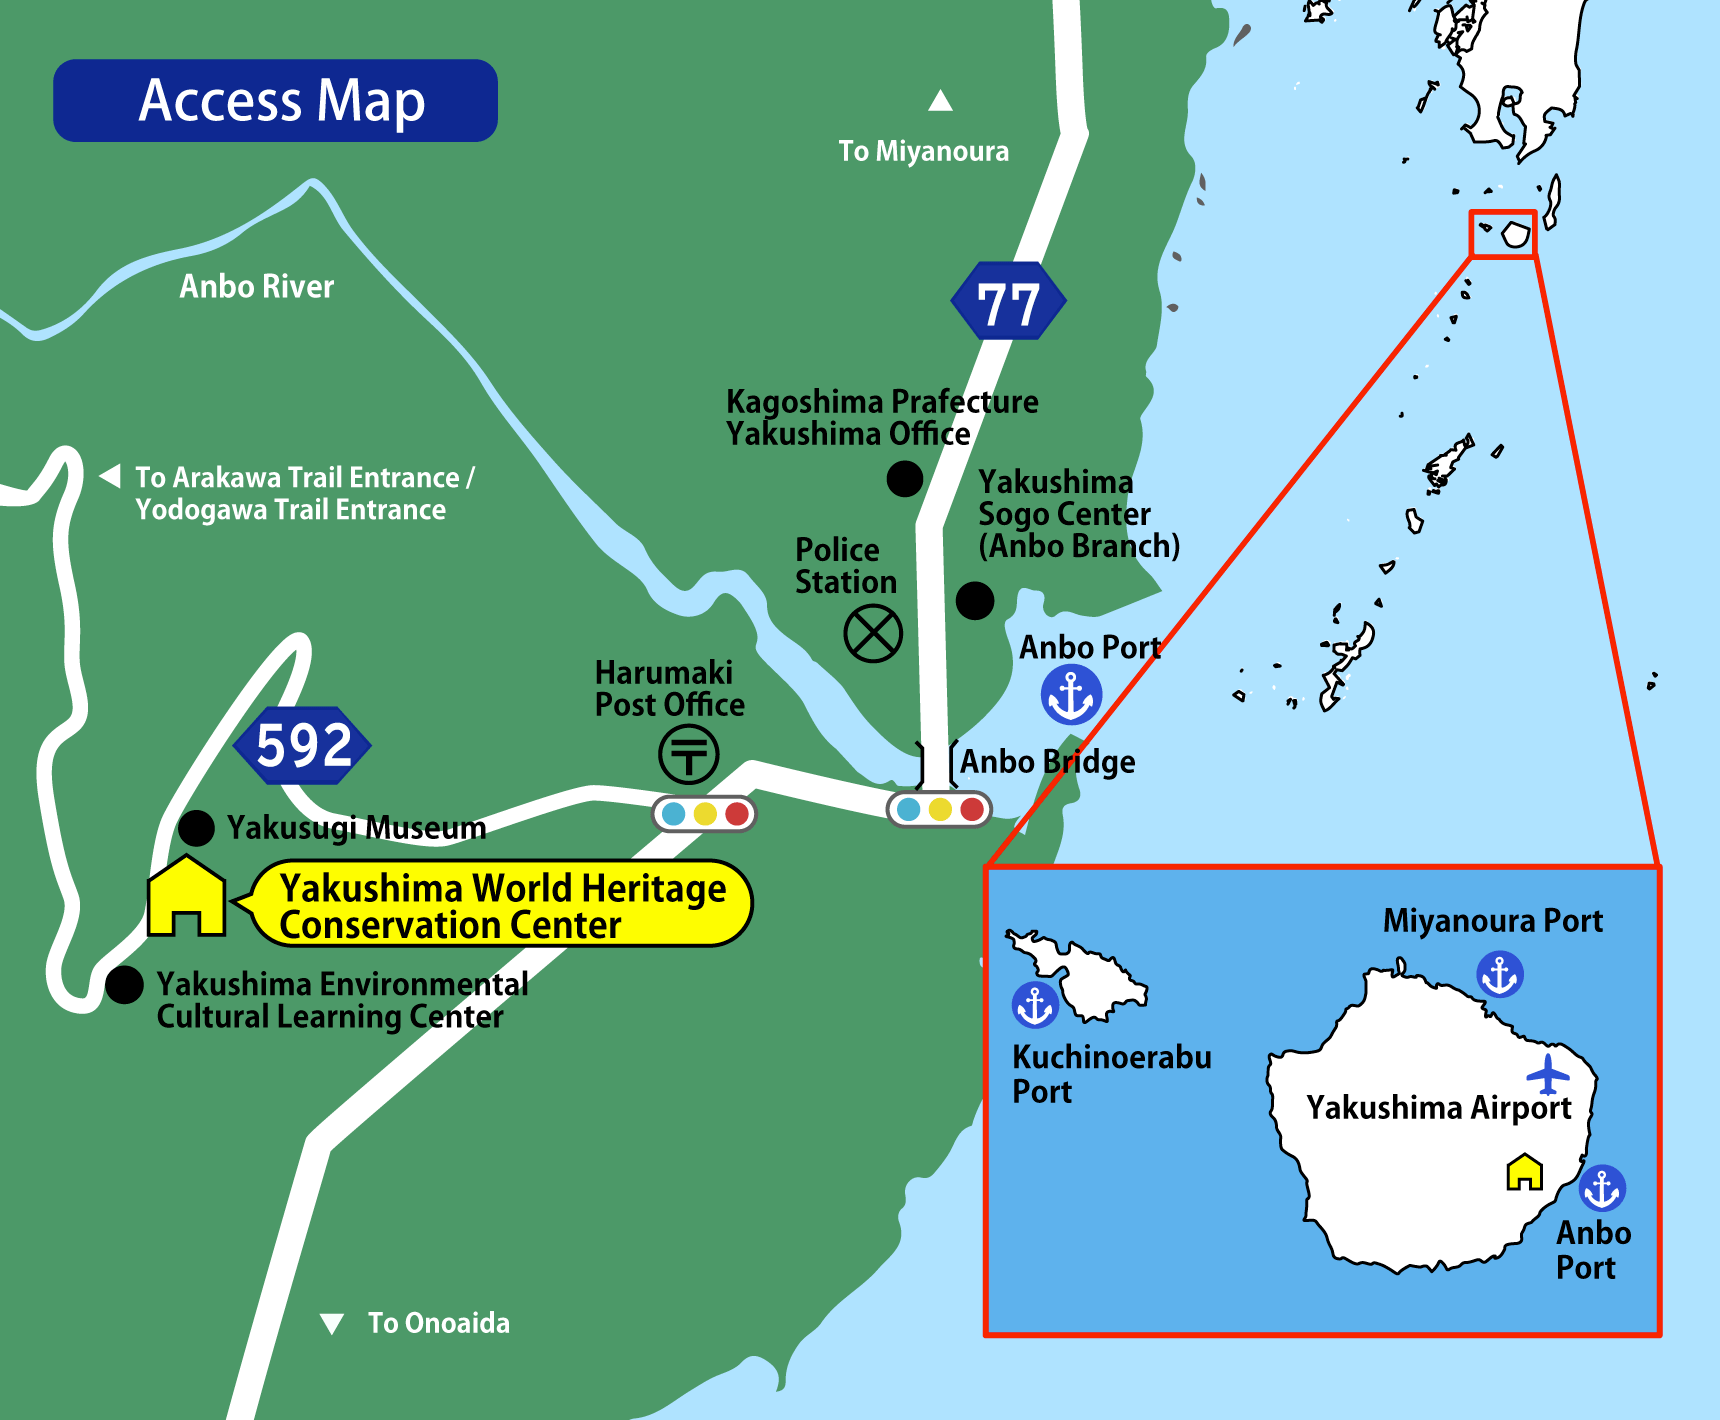 Access Map: The Yakushima World Heritage Conservation Center is located in the east-southeast area of Yakushima, on the west side of the mountain when viewed from the nearest port (Anbo Port).If you are coming from Miyanoura Port or Yakushima Airport in the northeast part of the island, head south on Prefectural Road 77, cross the Anbo River that flows into Anbo Port, go directly west (to the right), turn right at the intersection with Harumaki Post Office on your right (onto Prefectural Road 592) and continue along the road.Near the Center, there is also the Yakusugi Museum a little further ahead, and the Yakushima Environmental Cultural Learning Center further on as you pass by.Refer to the transport guide in the text for details.